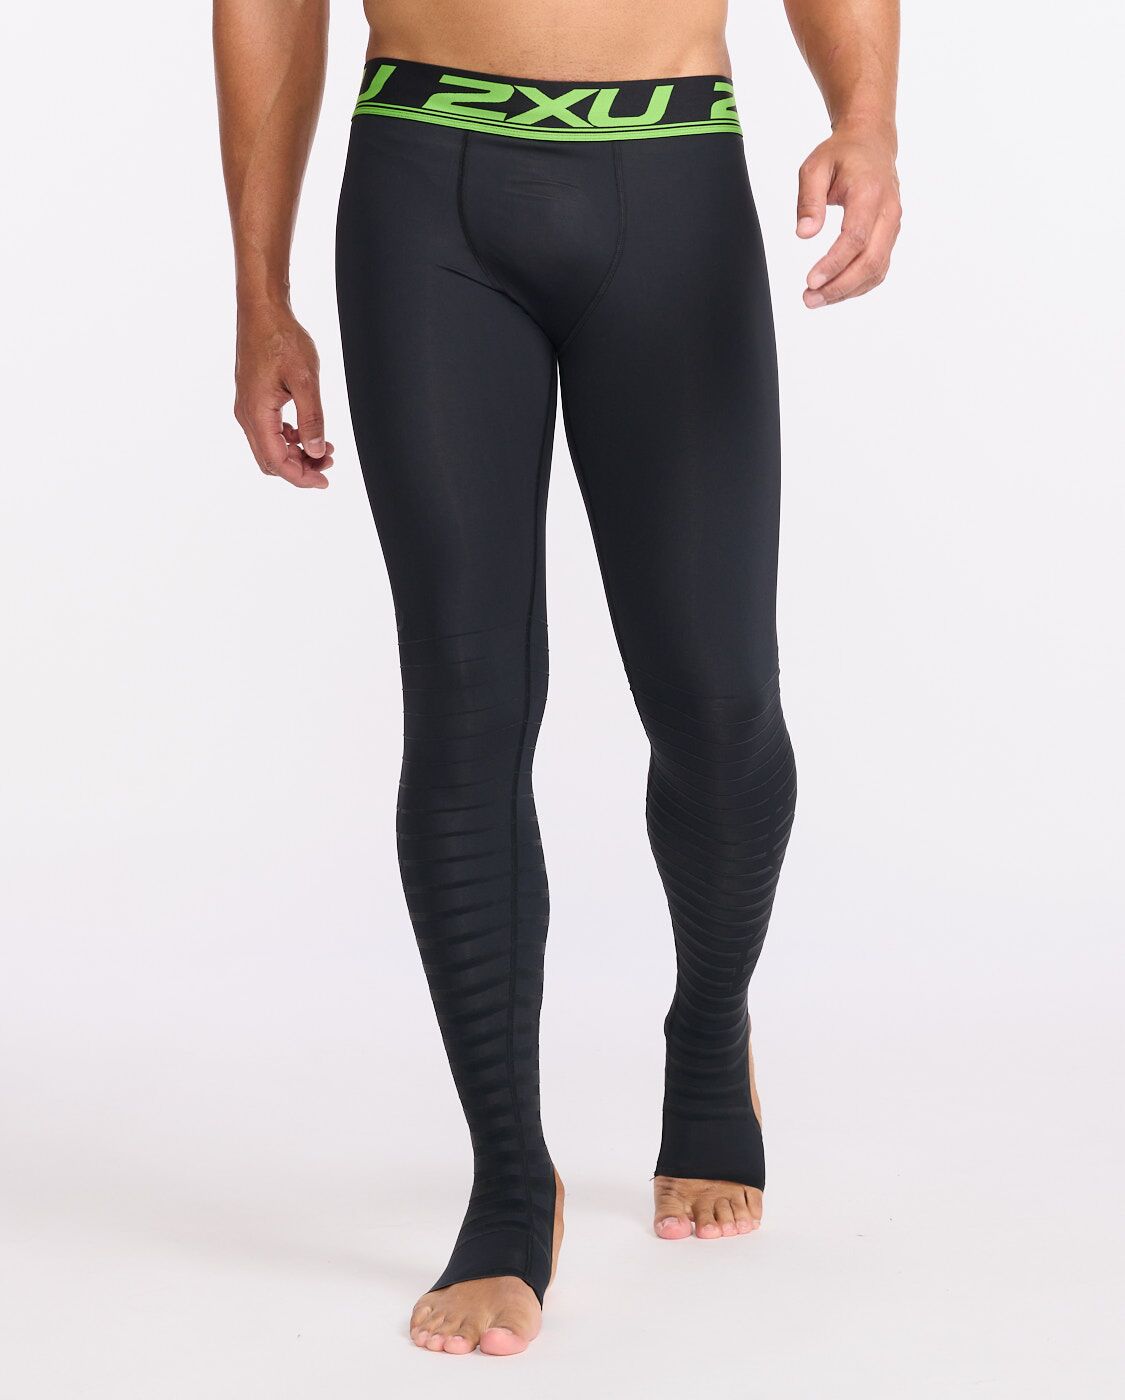 Power Recovery compression Tights